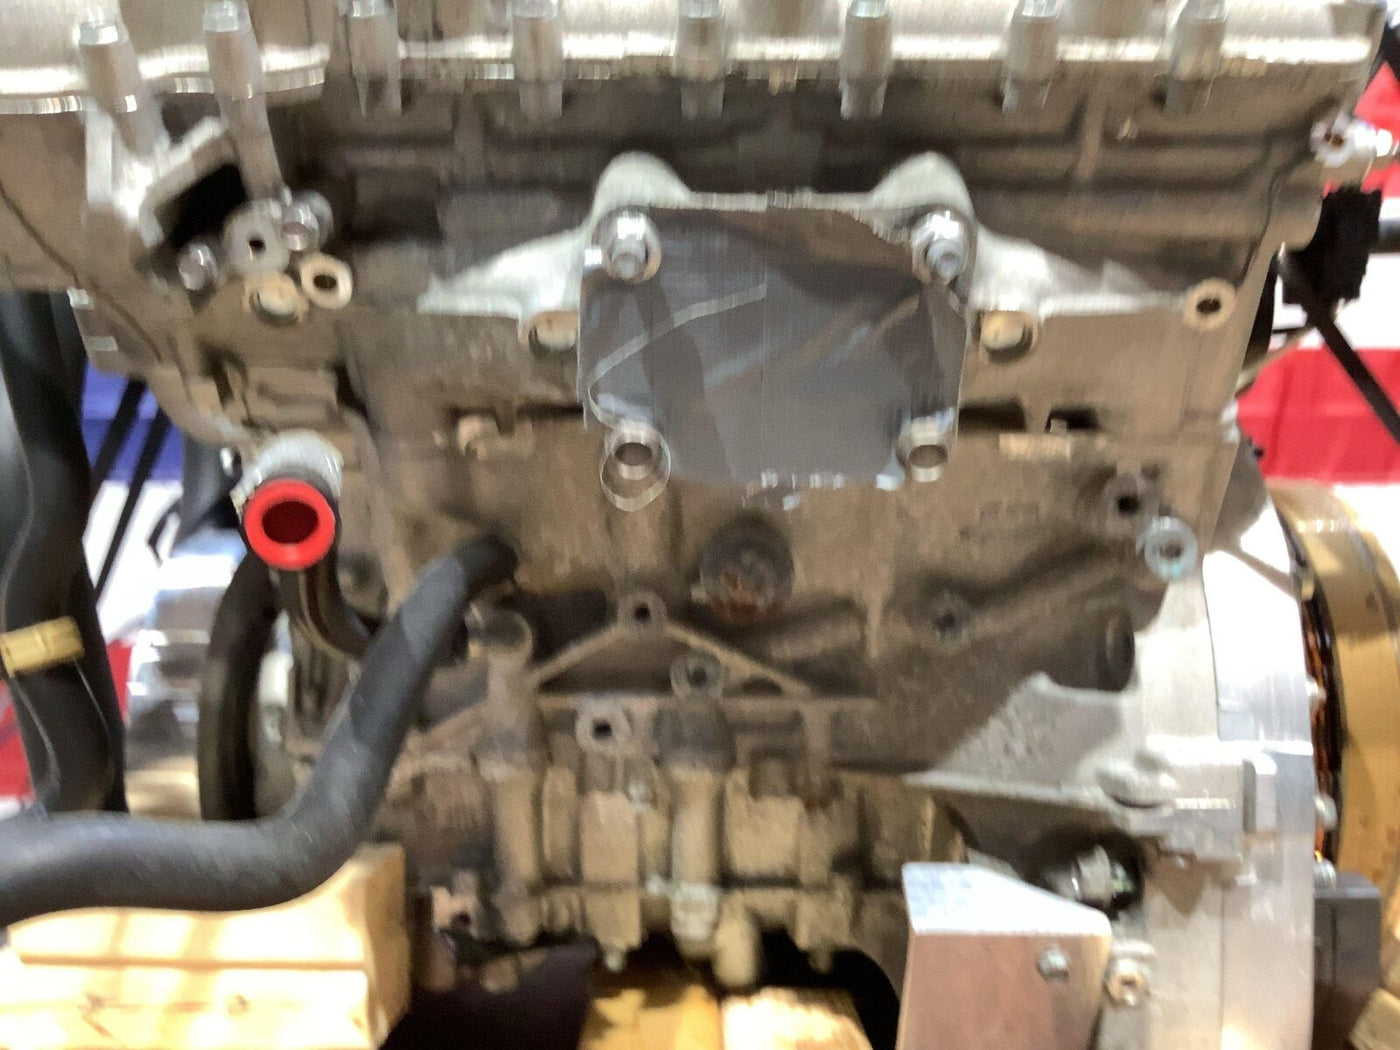 17-21 Acura NSX 3.5L Engine W/O Turbos W/ Wiring Harness (Unable To Test) 42K